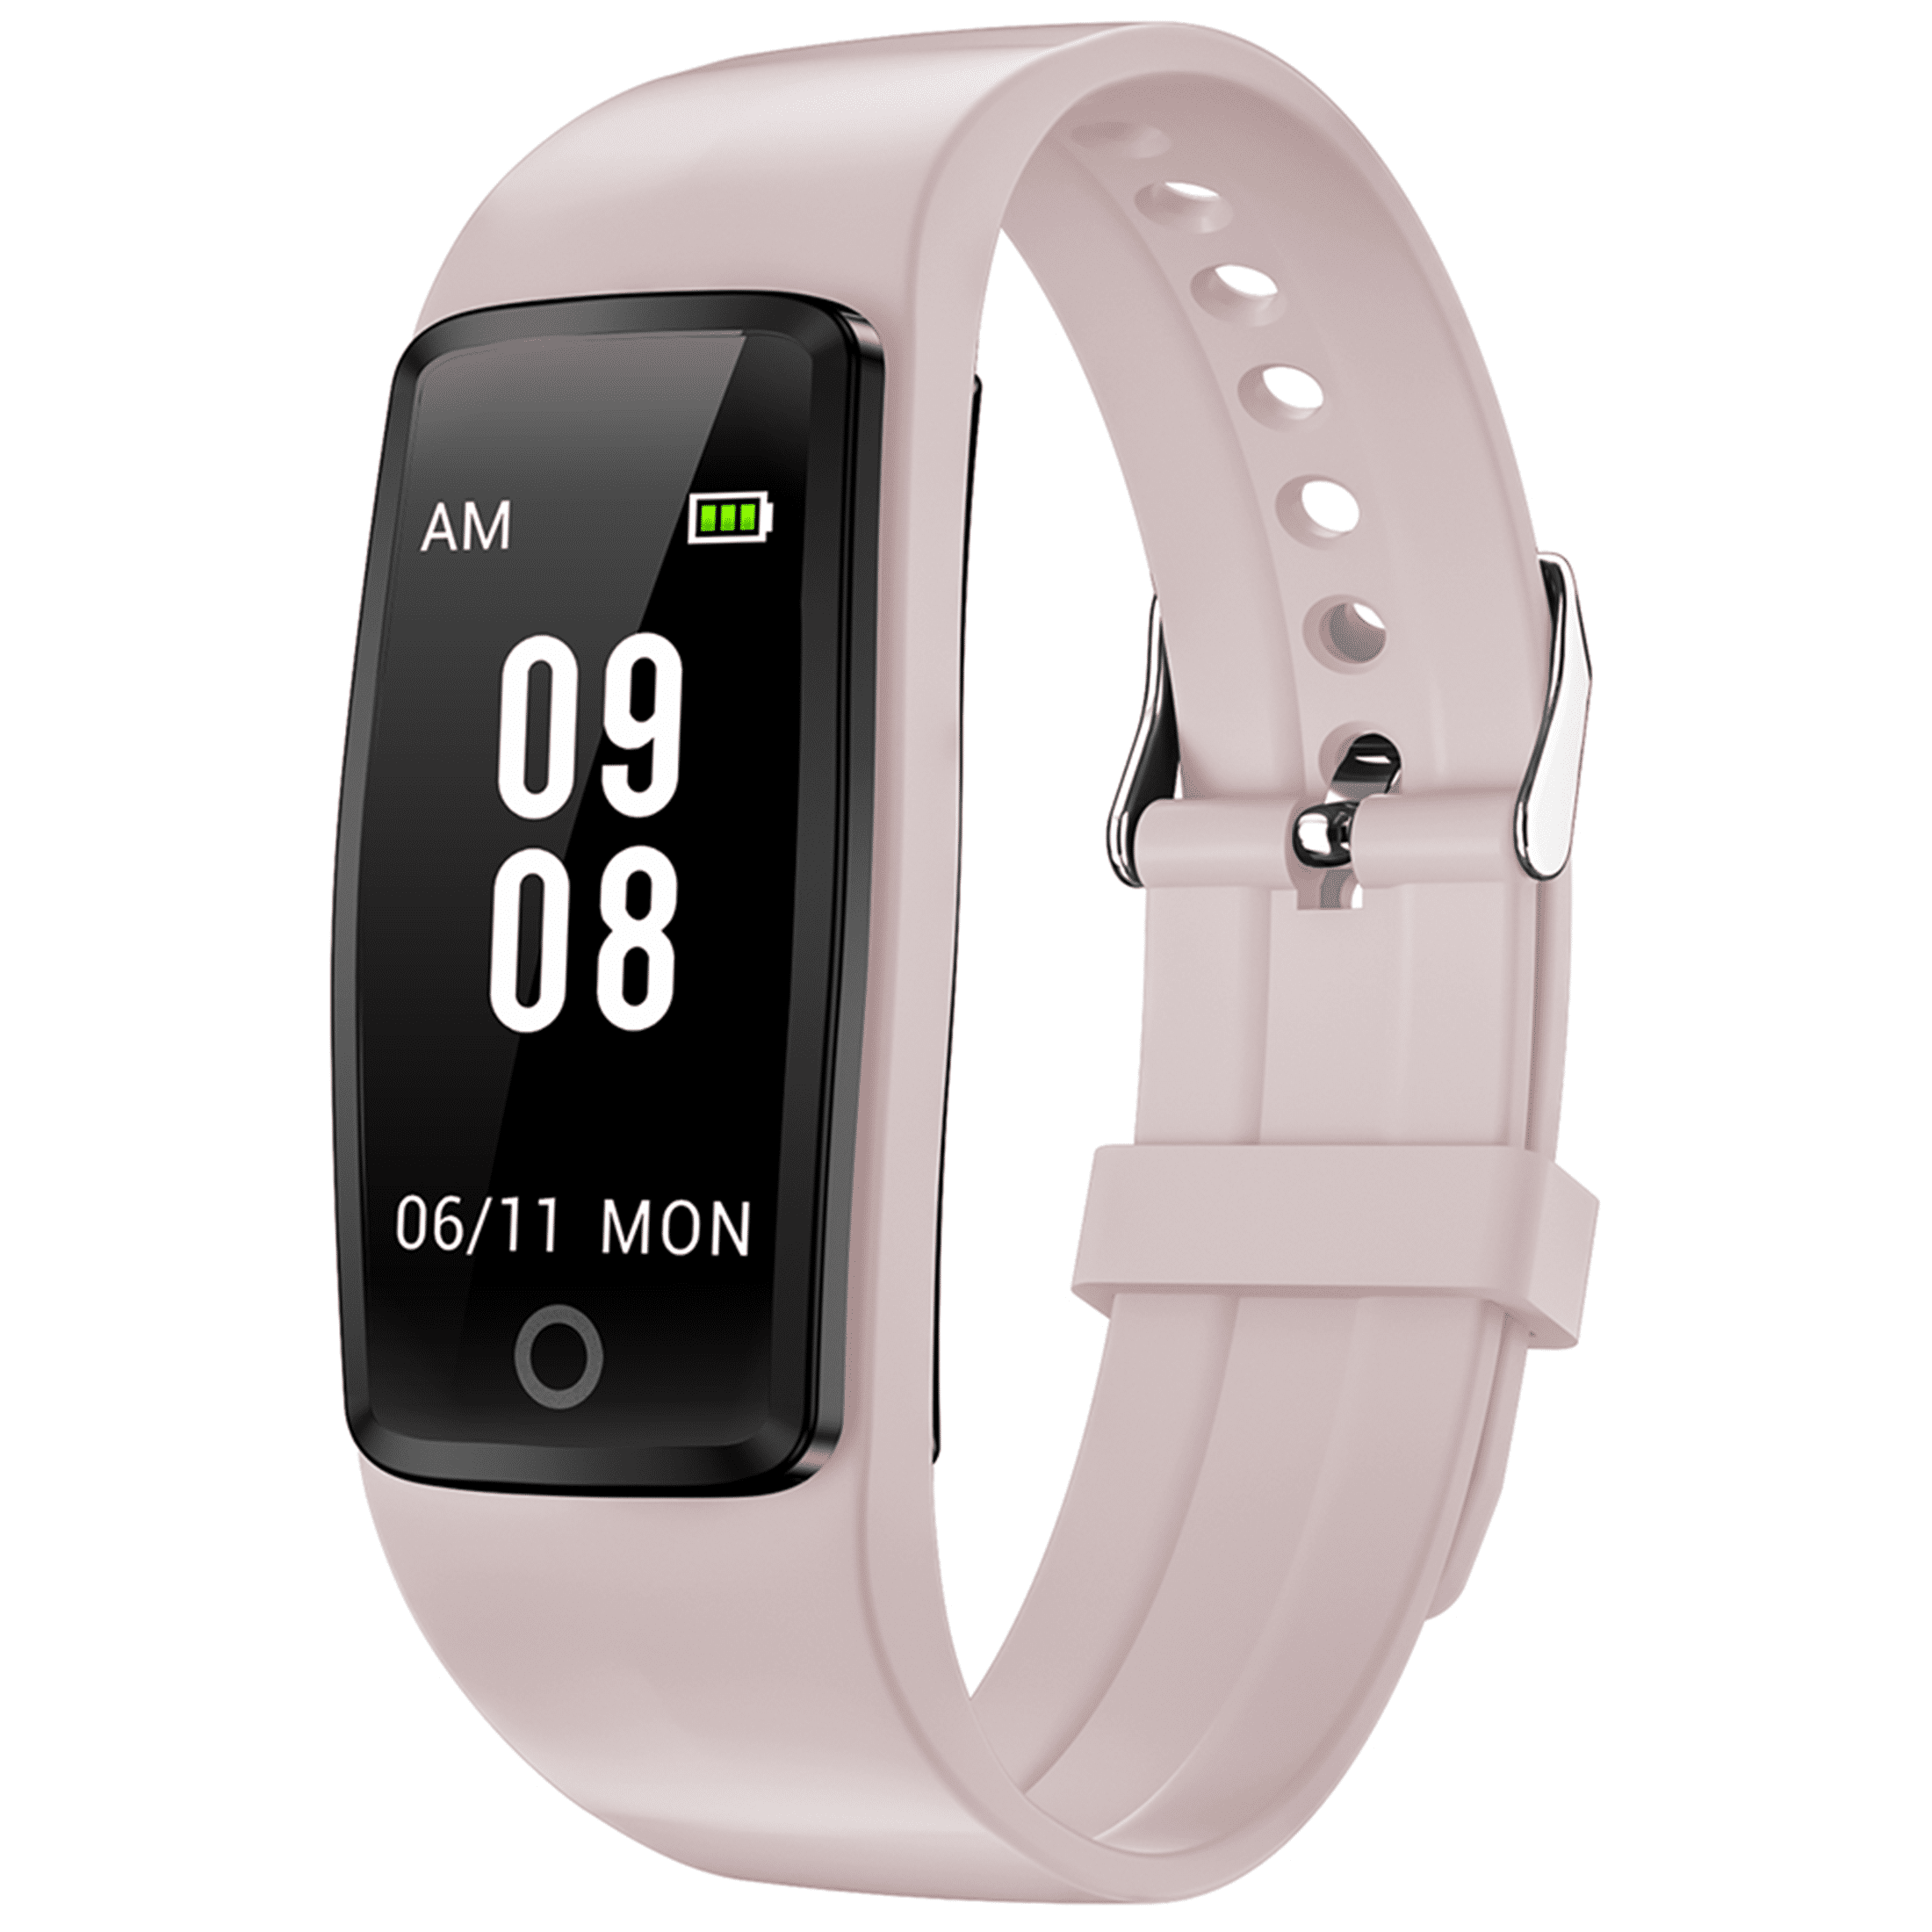 What app do I need for my fitness tracker?